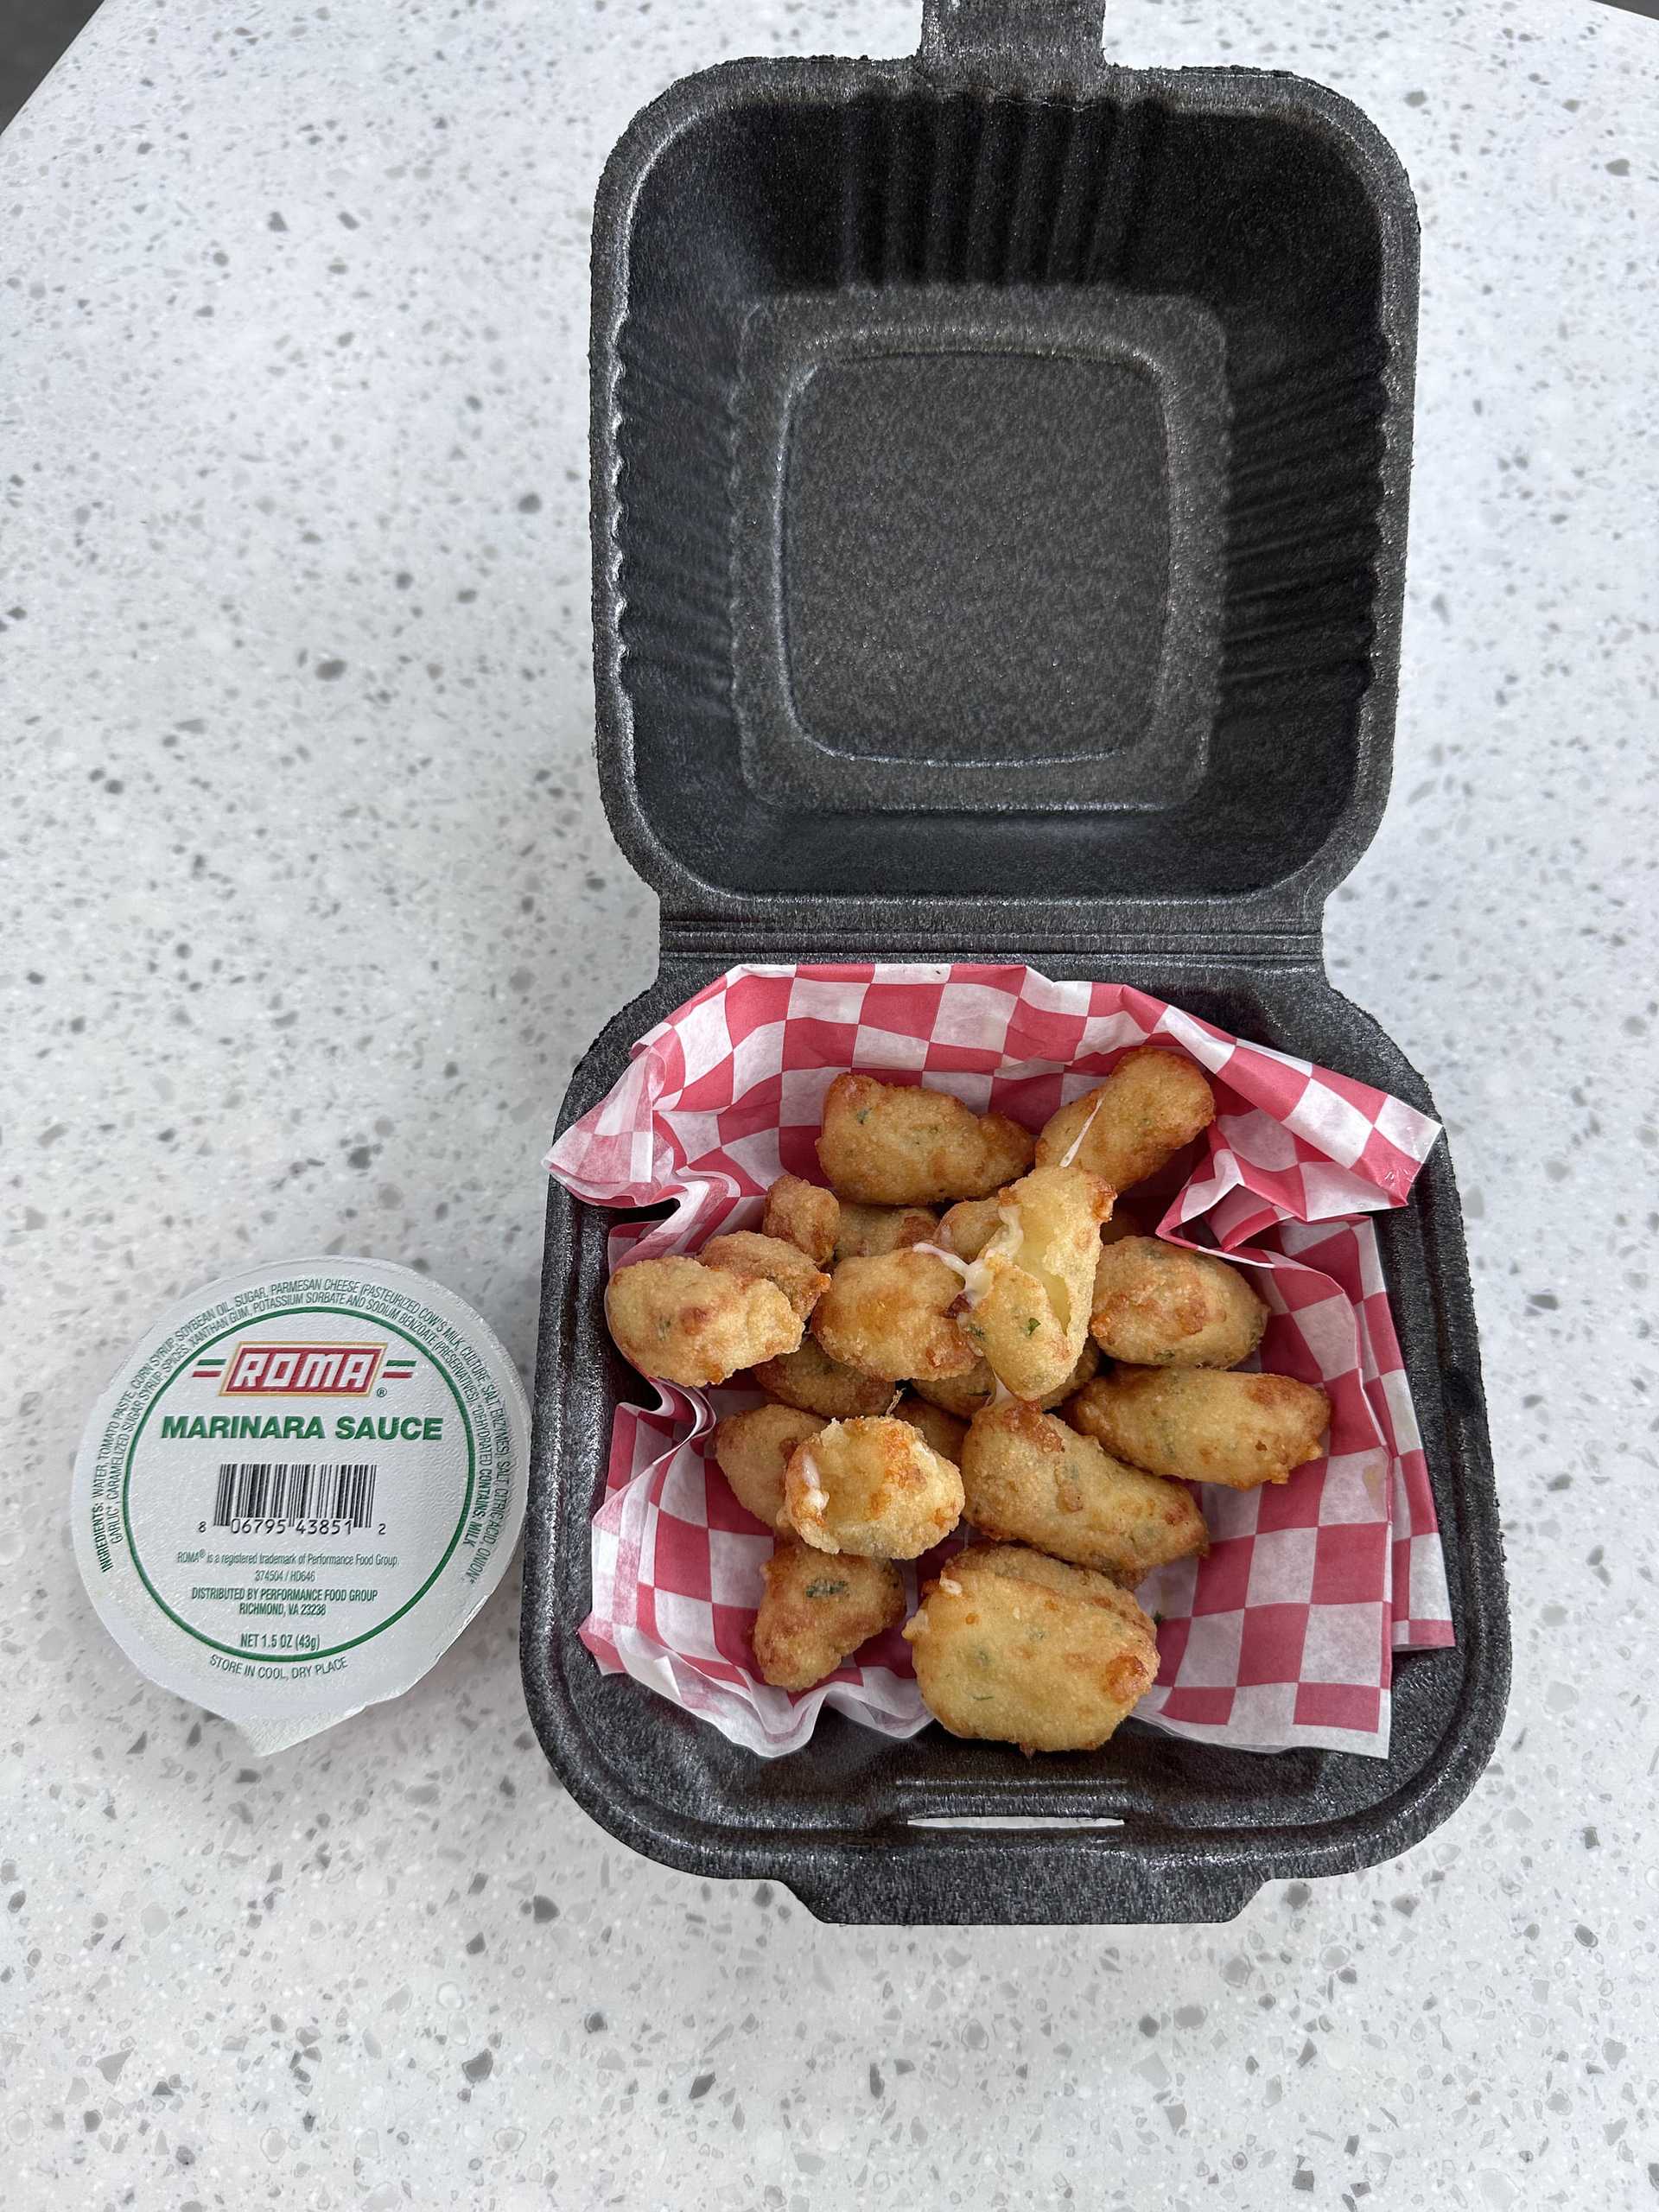 Fried cheese curds in a black takeout box with a side of marinara sauce on a speckled countertop.